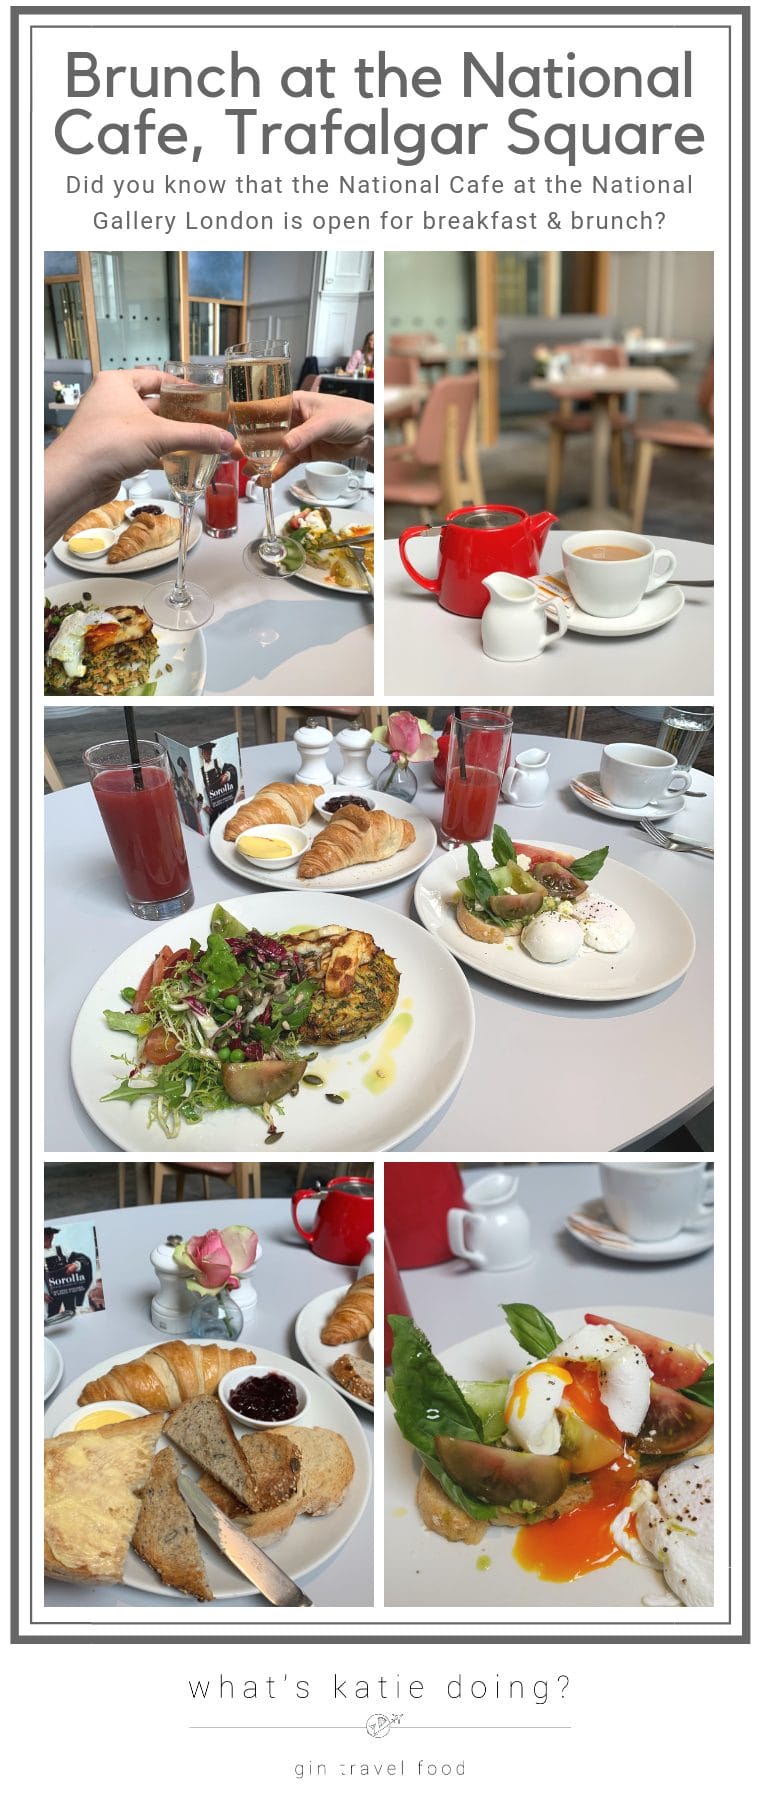 Brunch at the National Cafe, National Gallery London